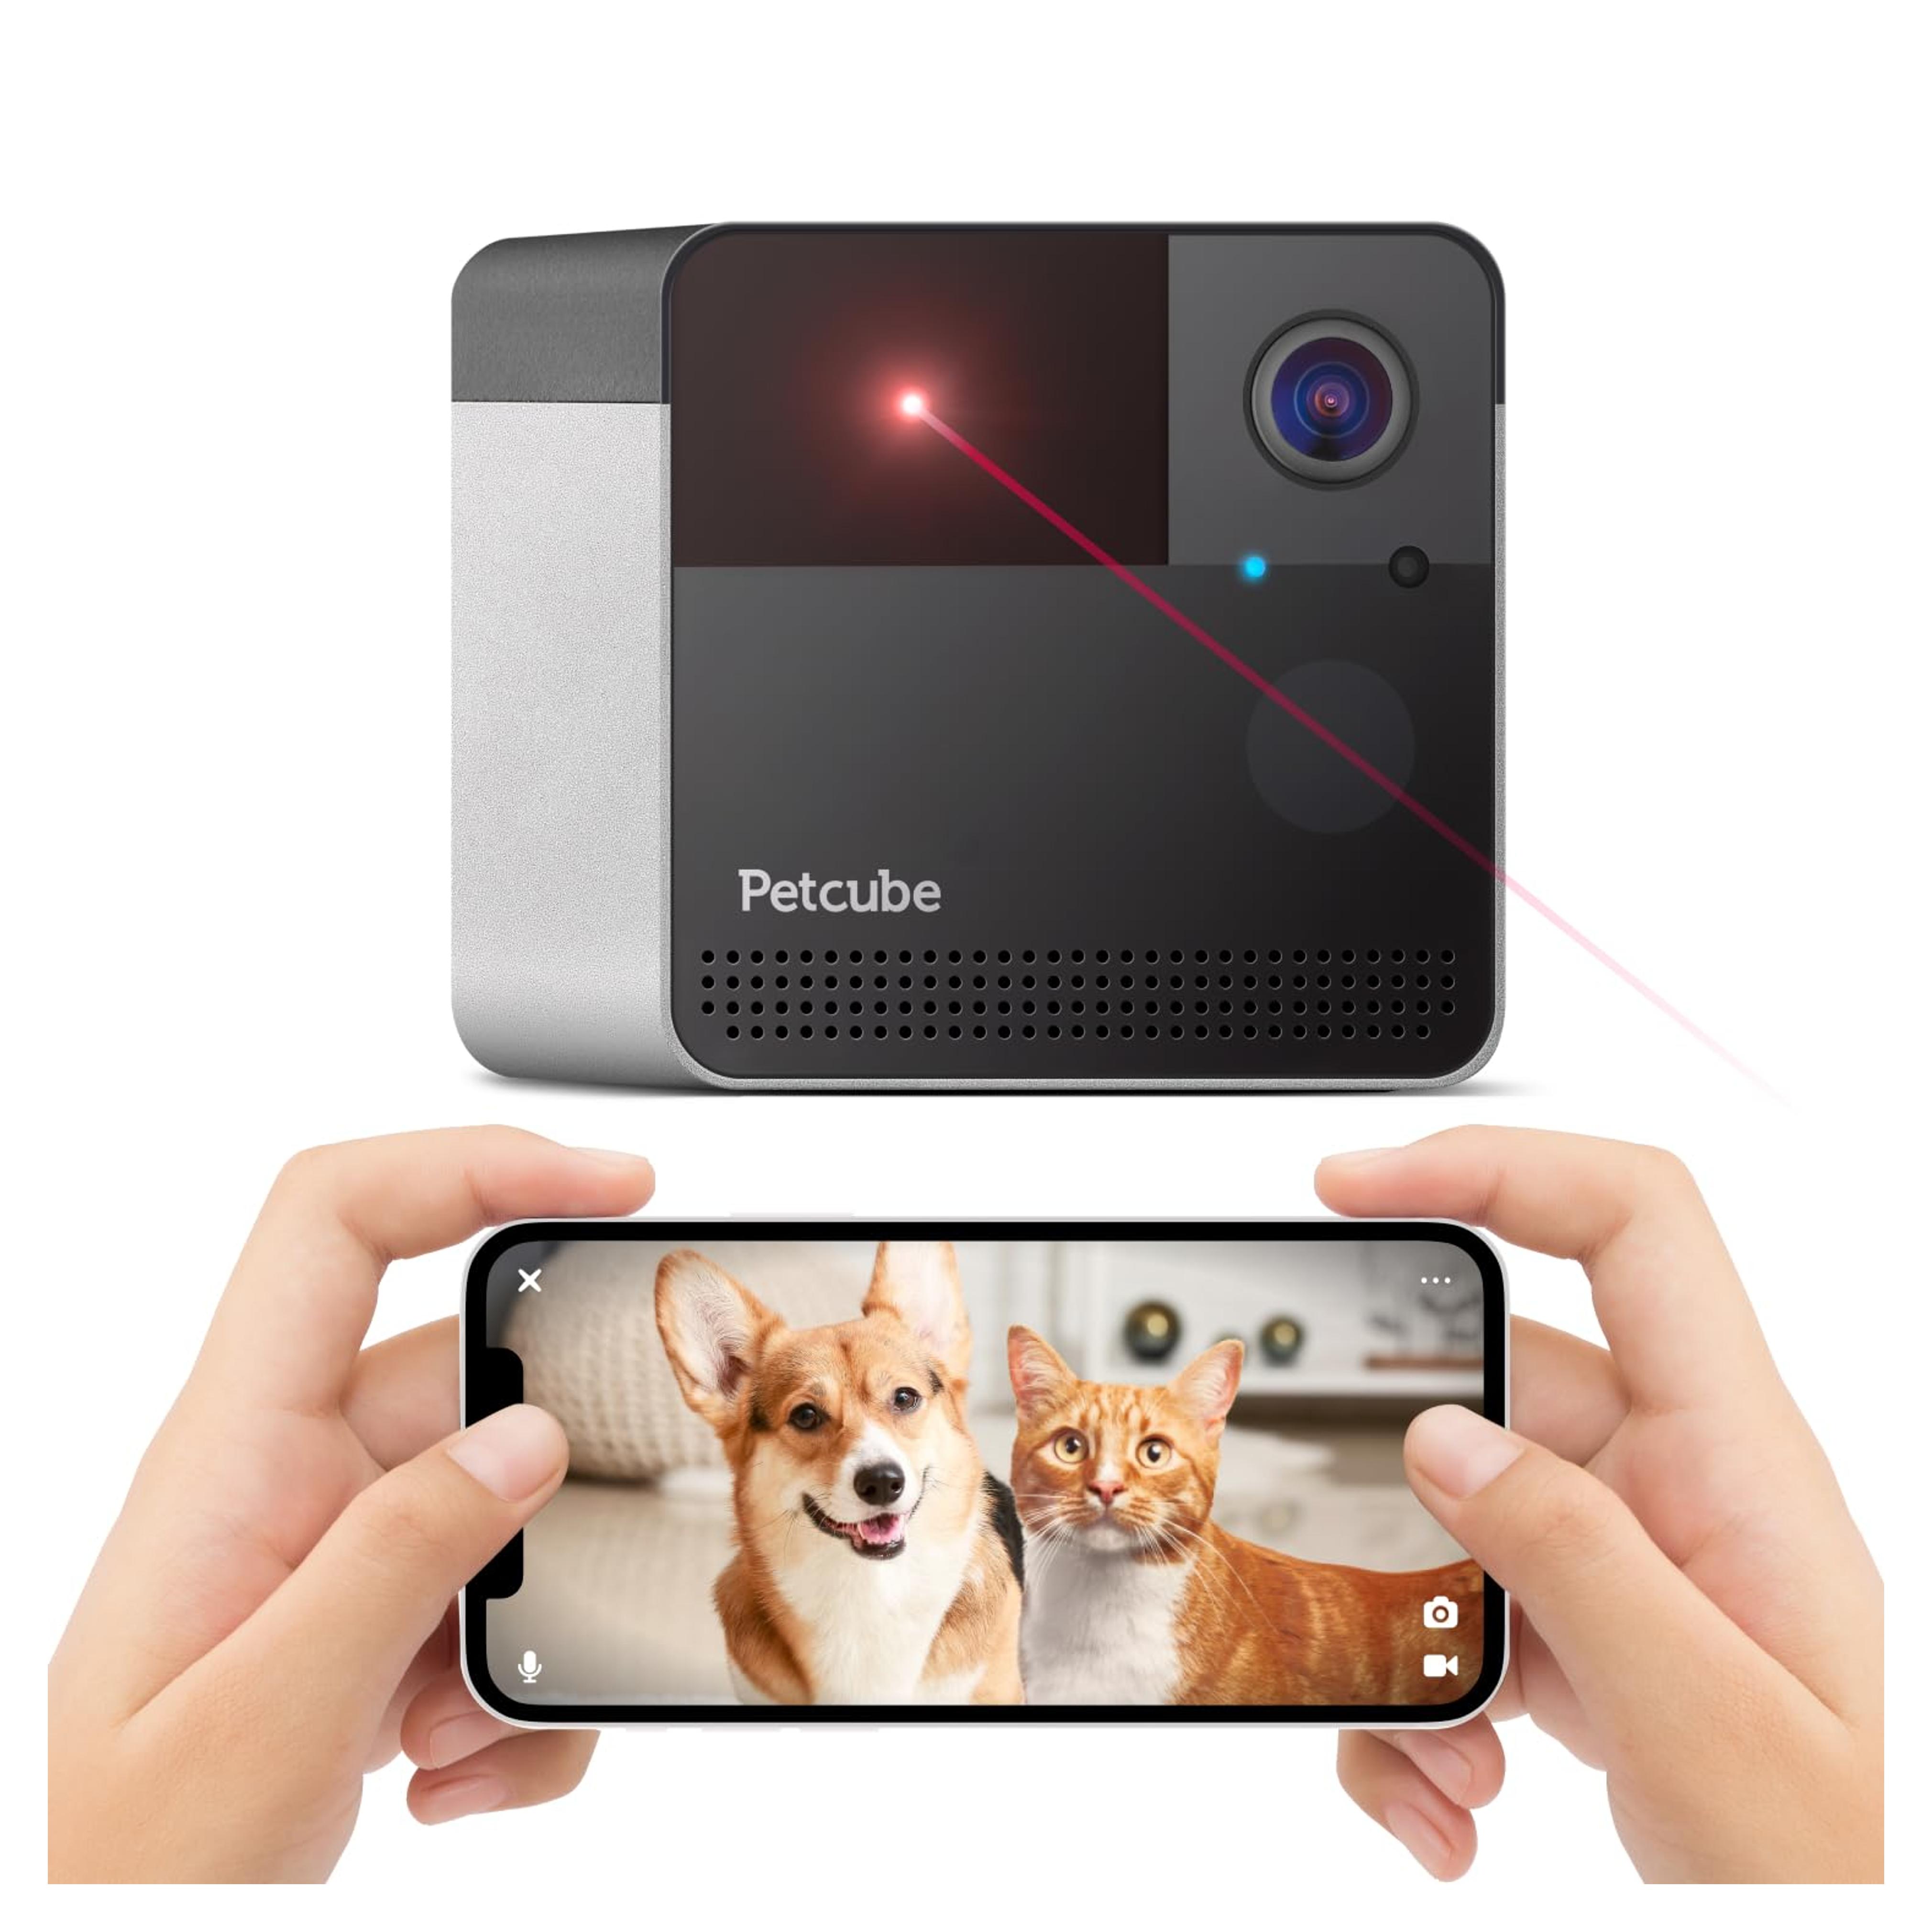 Amazon.com: Petcube Play 2 Wi-Fi Pet Camera with Laser Toy for Cats & Dogs, 1080P HD Video, 160° Full-Room View, 2-Way Audio, Sound/Motion Alerts, Night Vision, Pet Monitoring App : Pet Supplies